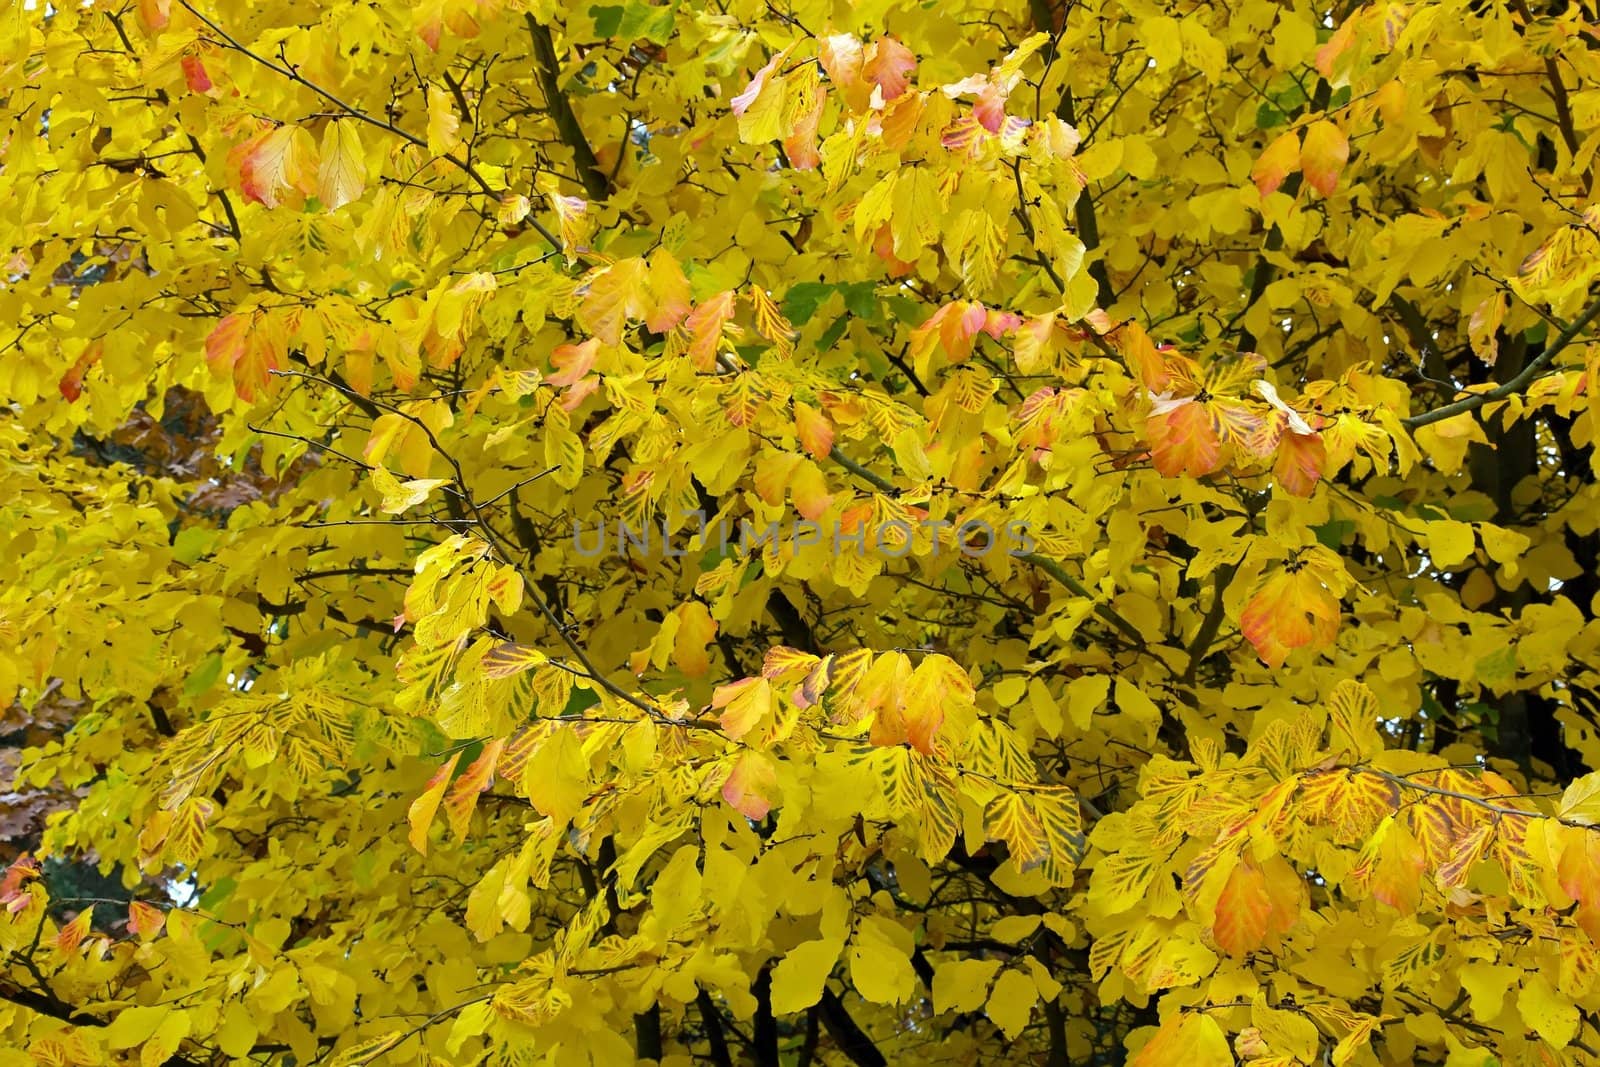 yellow foliage, the warm colors of autumn